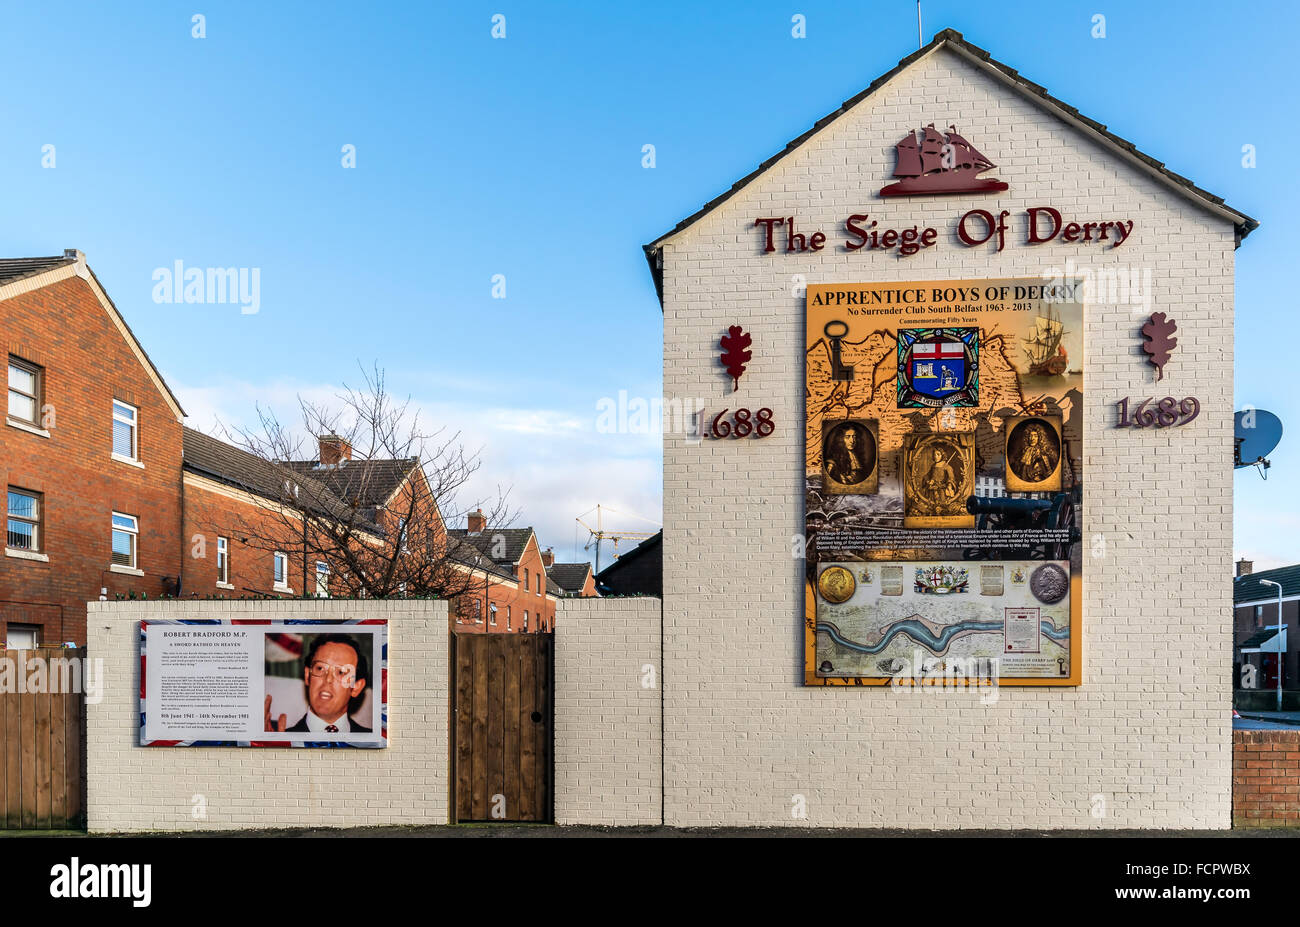 The Siege of Derry mural in the Loyalists Donegall Pass area of South Belfast. Stock Photo